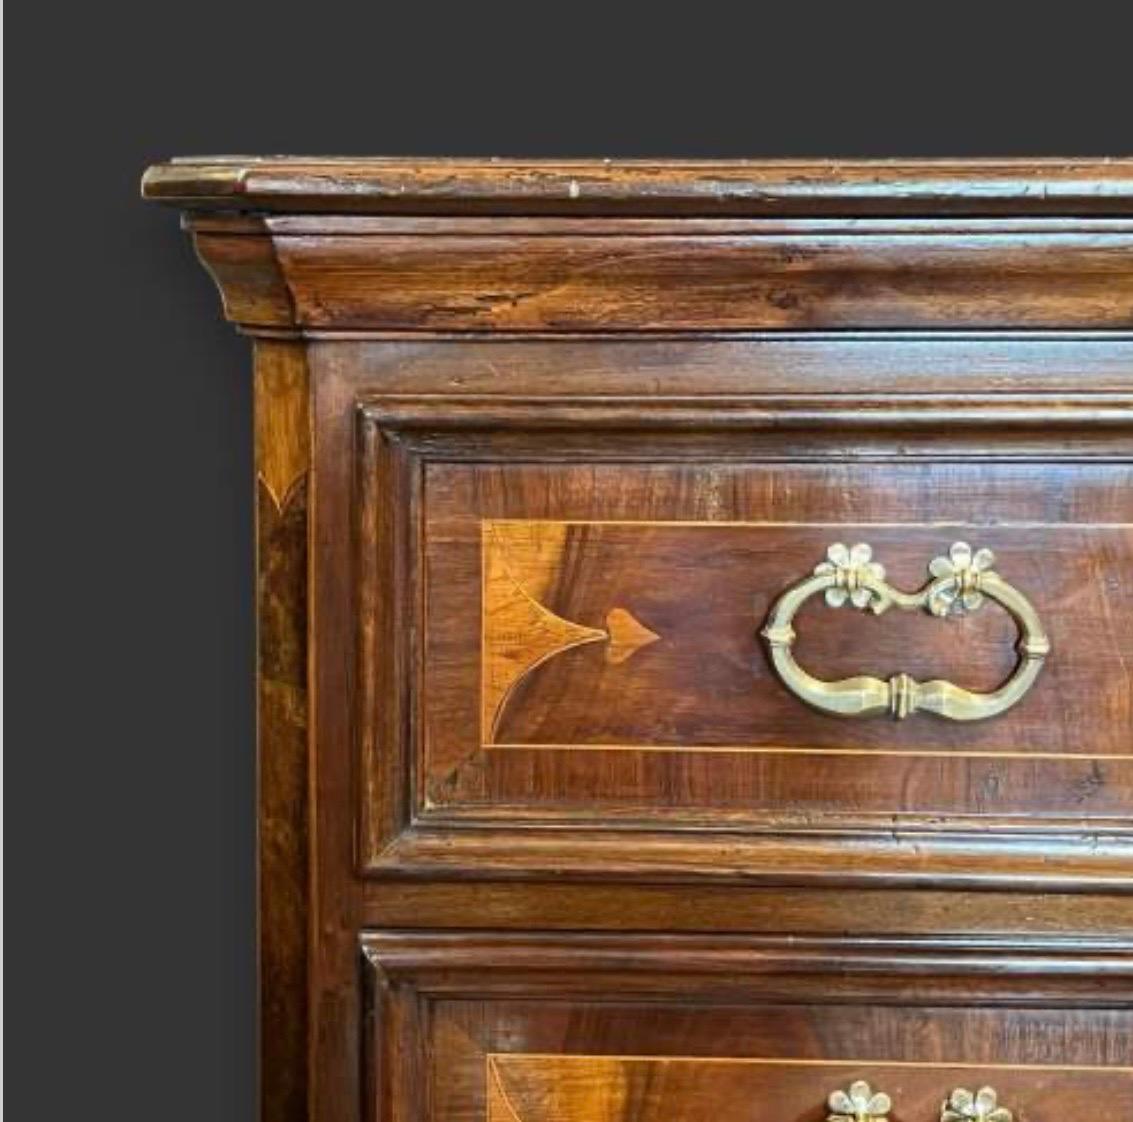 A Large 18th century Northern Italian chest of drawers. 
Three large drawers with faux double fronts. Inlaid accents to the drawer fronts and canted corners. Standing on carved bracket feet. 
Superb quality fruitwood inlay and all original